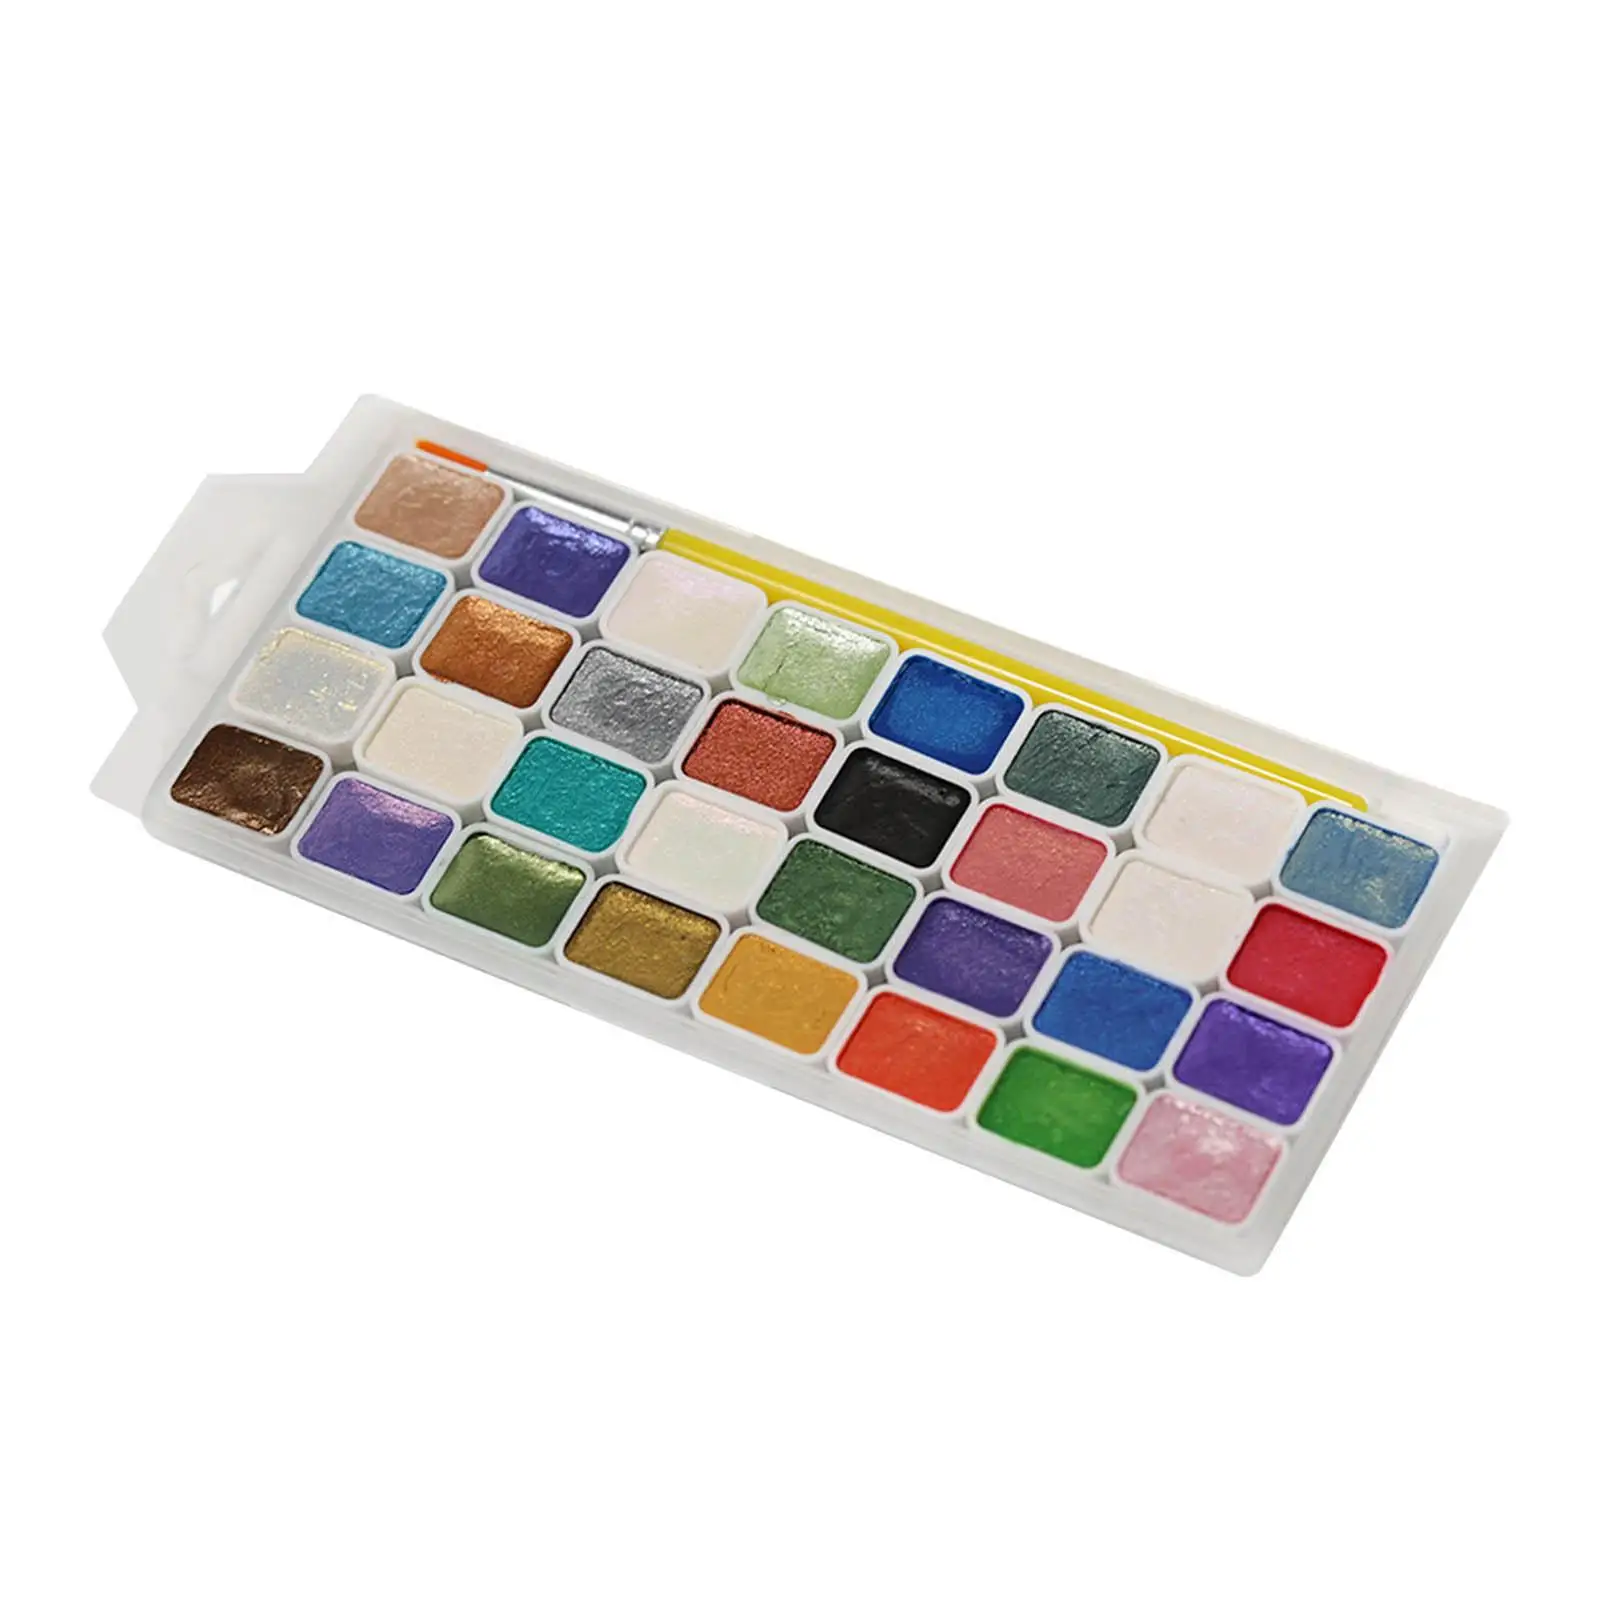 32 Colors Solid Watercolor Painting Palette Nail Decoration Natural Artificial Nails Gouache Paint Set for Artists Beginners